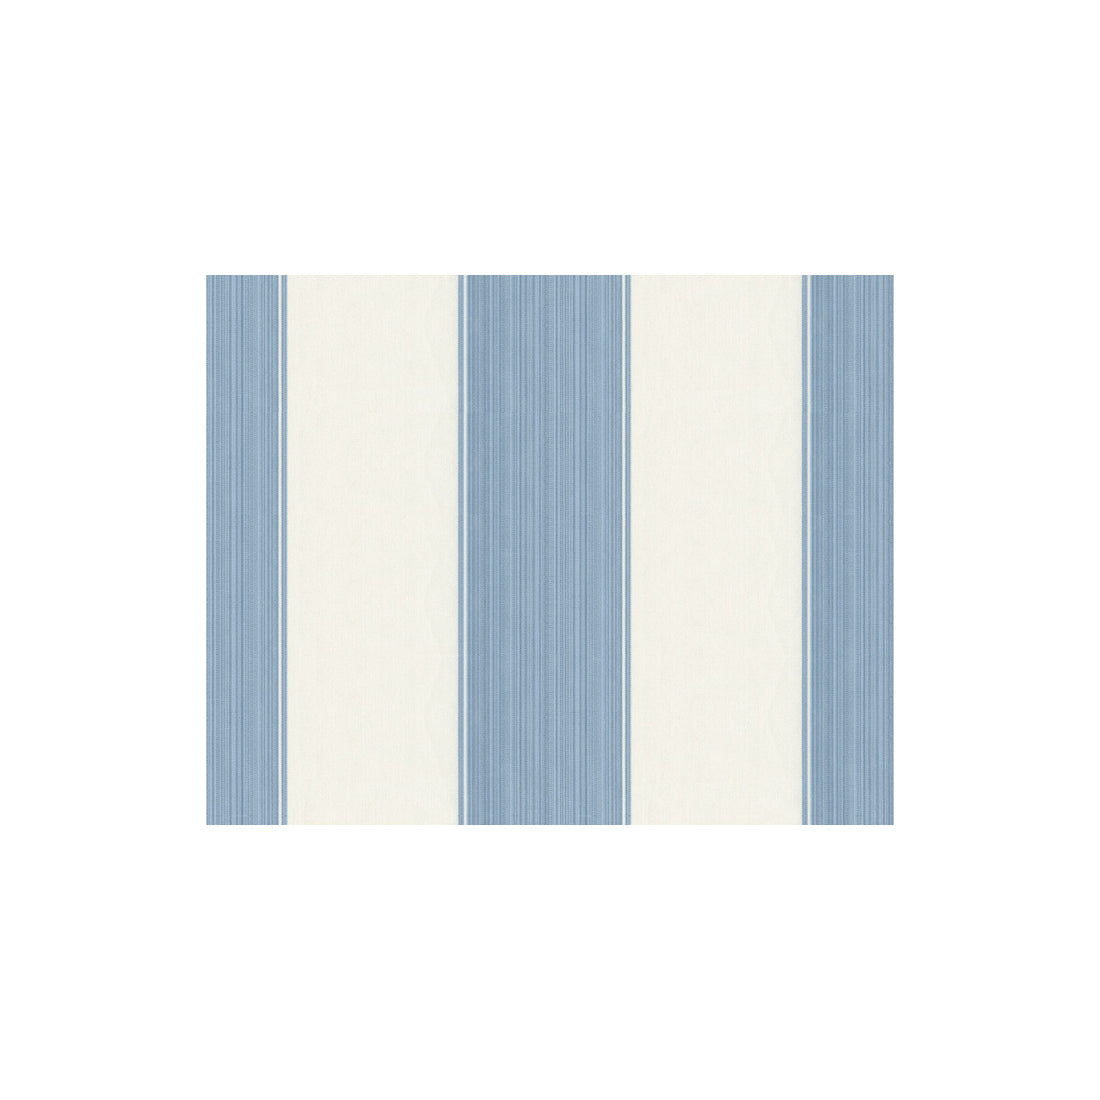 Granby fabric in lake color - pattern 32997.5.0 - by Kravet Basics in the Sarah Richardson Affinity collection